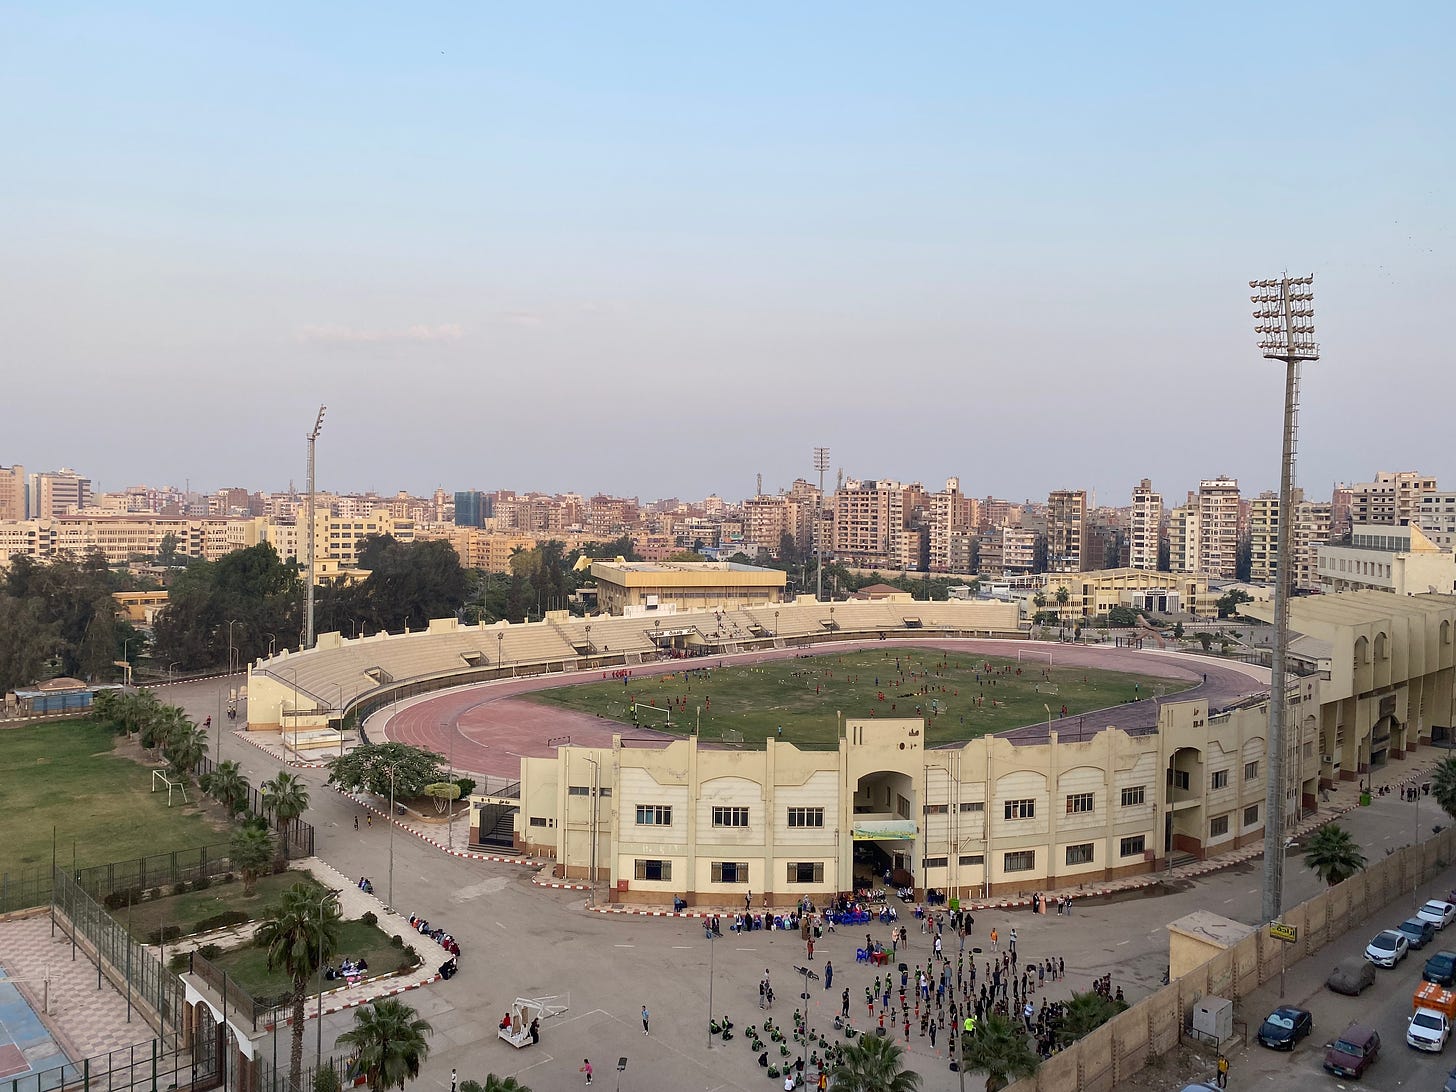 A view of the city of Mansoura with high rise buildings and a stadium